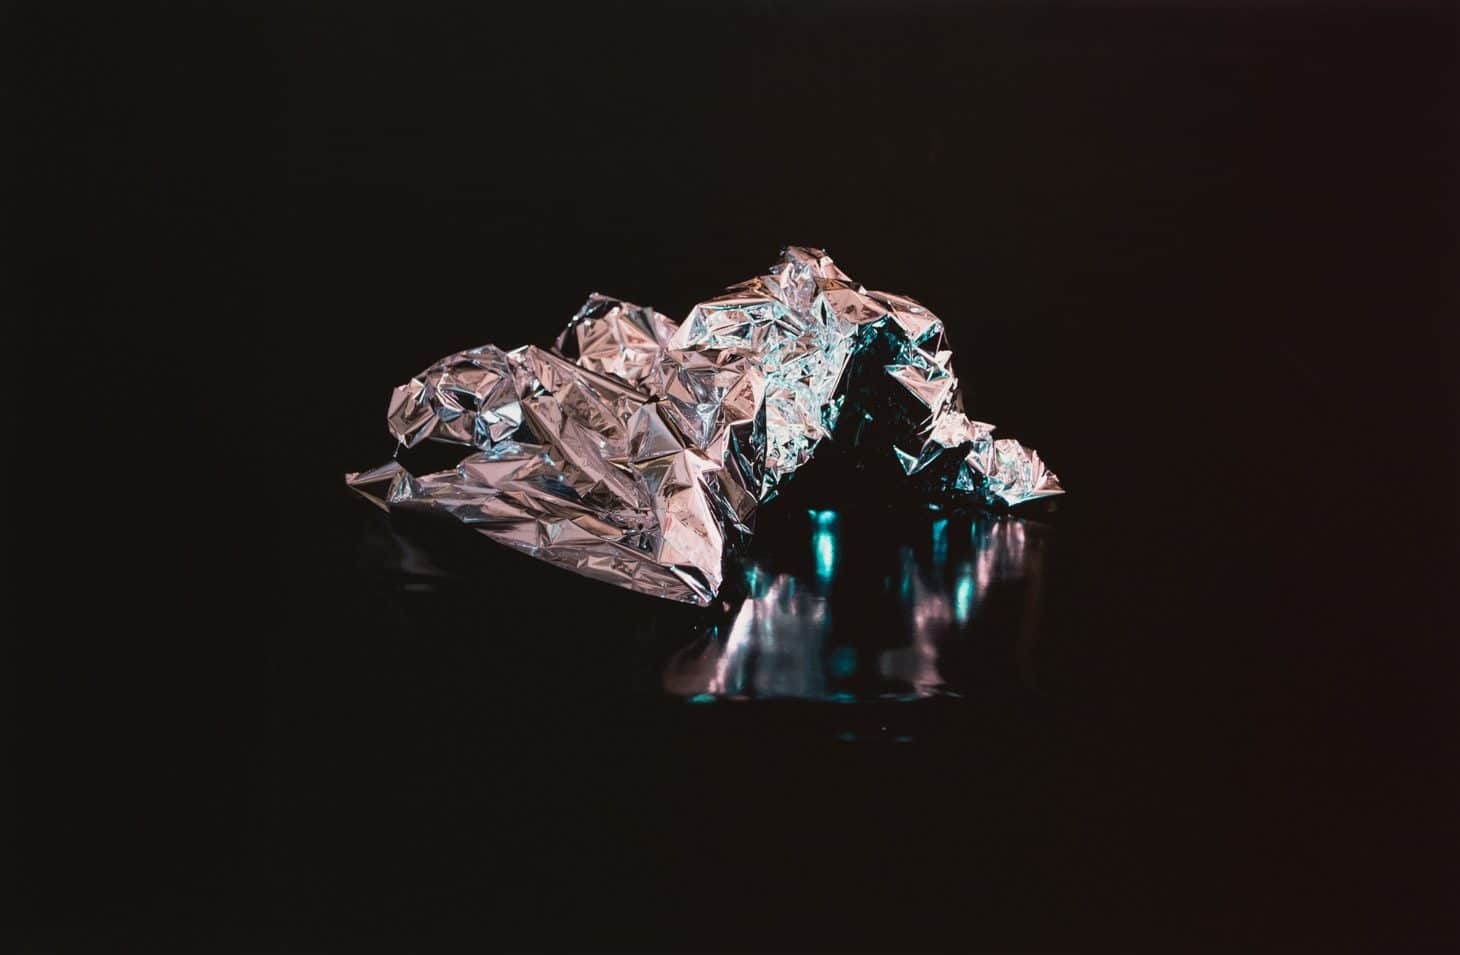 Image of Teresa Carlesimo's artwork titled, "a form of unrest, II." Pictured here: a vinyl printed digital image of a crumpled up emergency blanket.